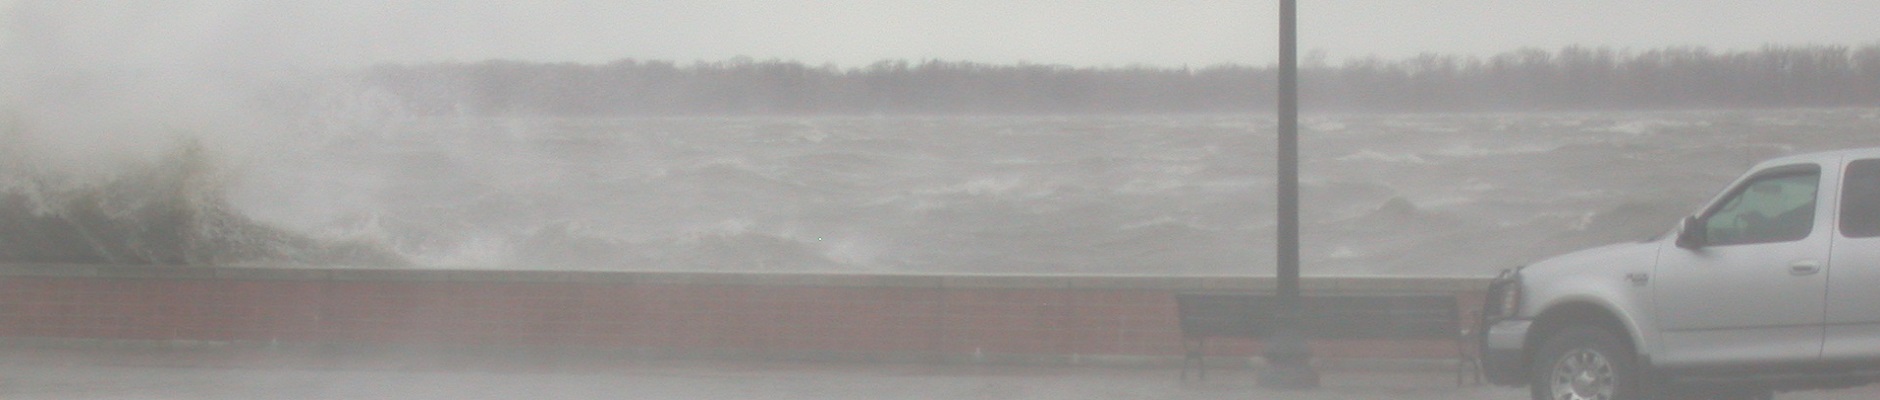 photo of stormy waters